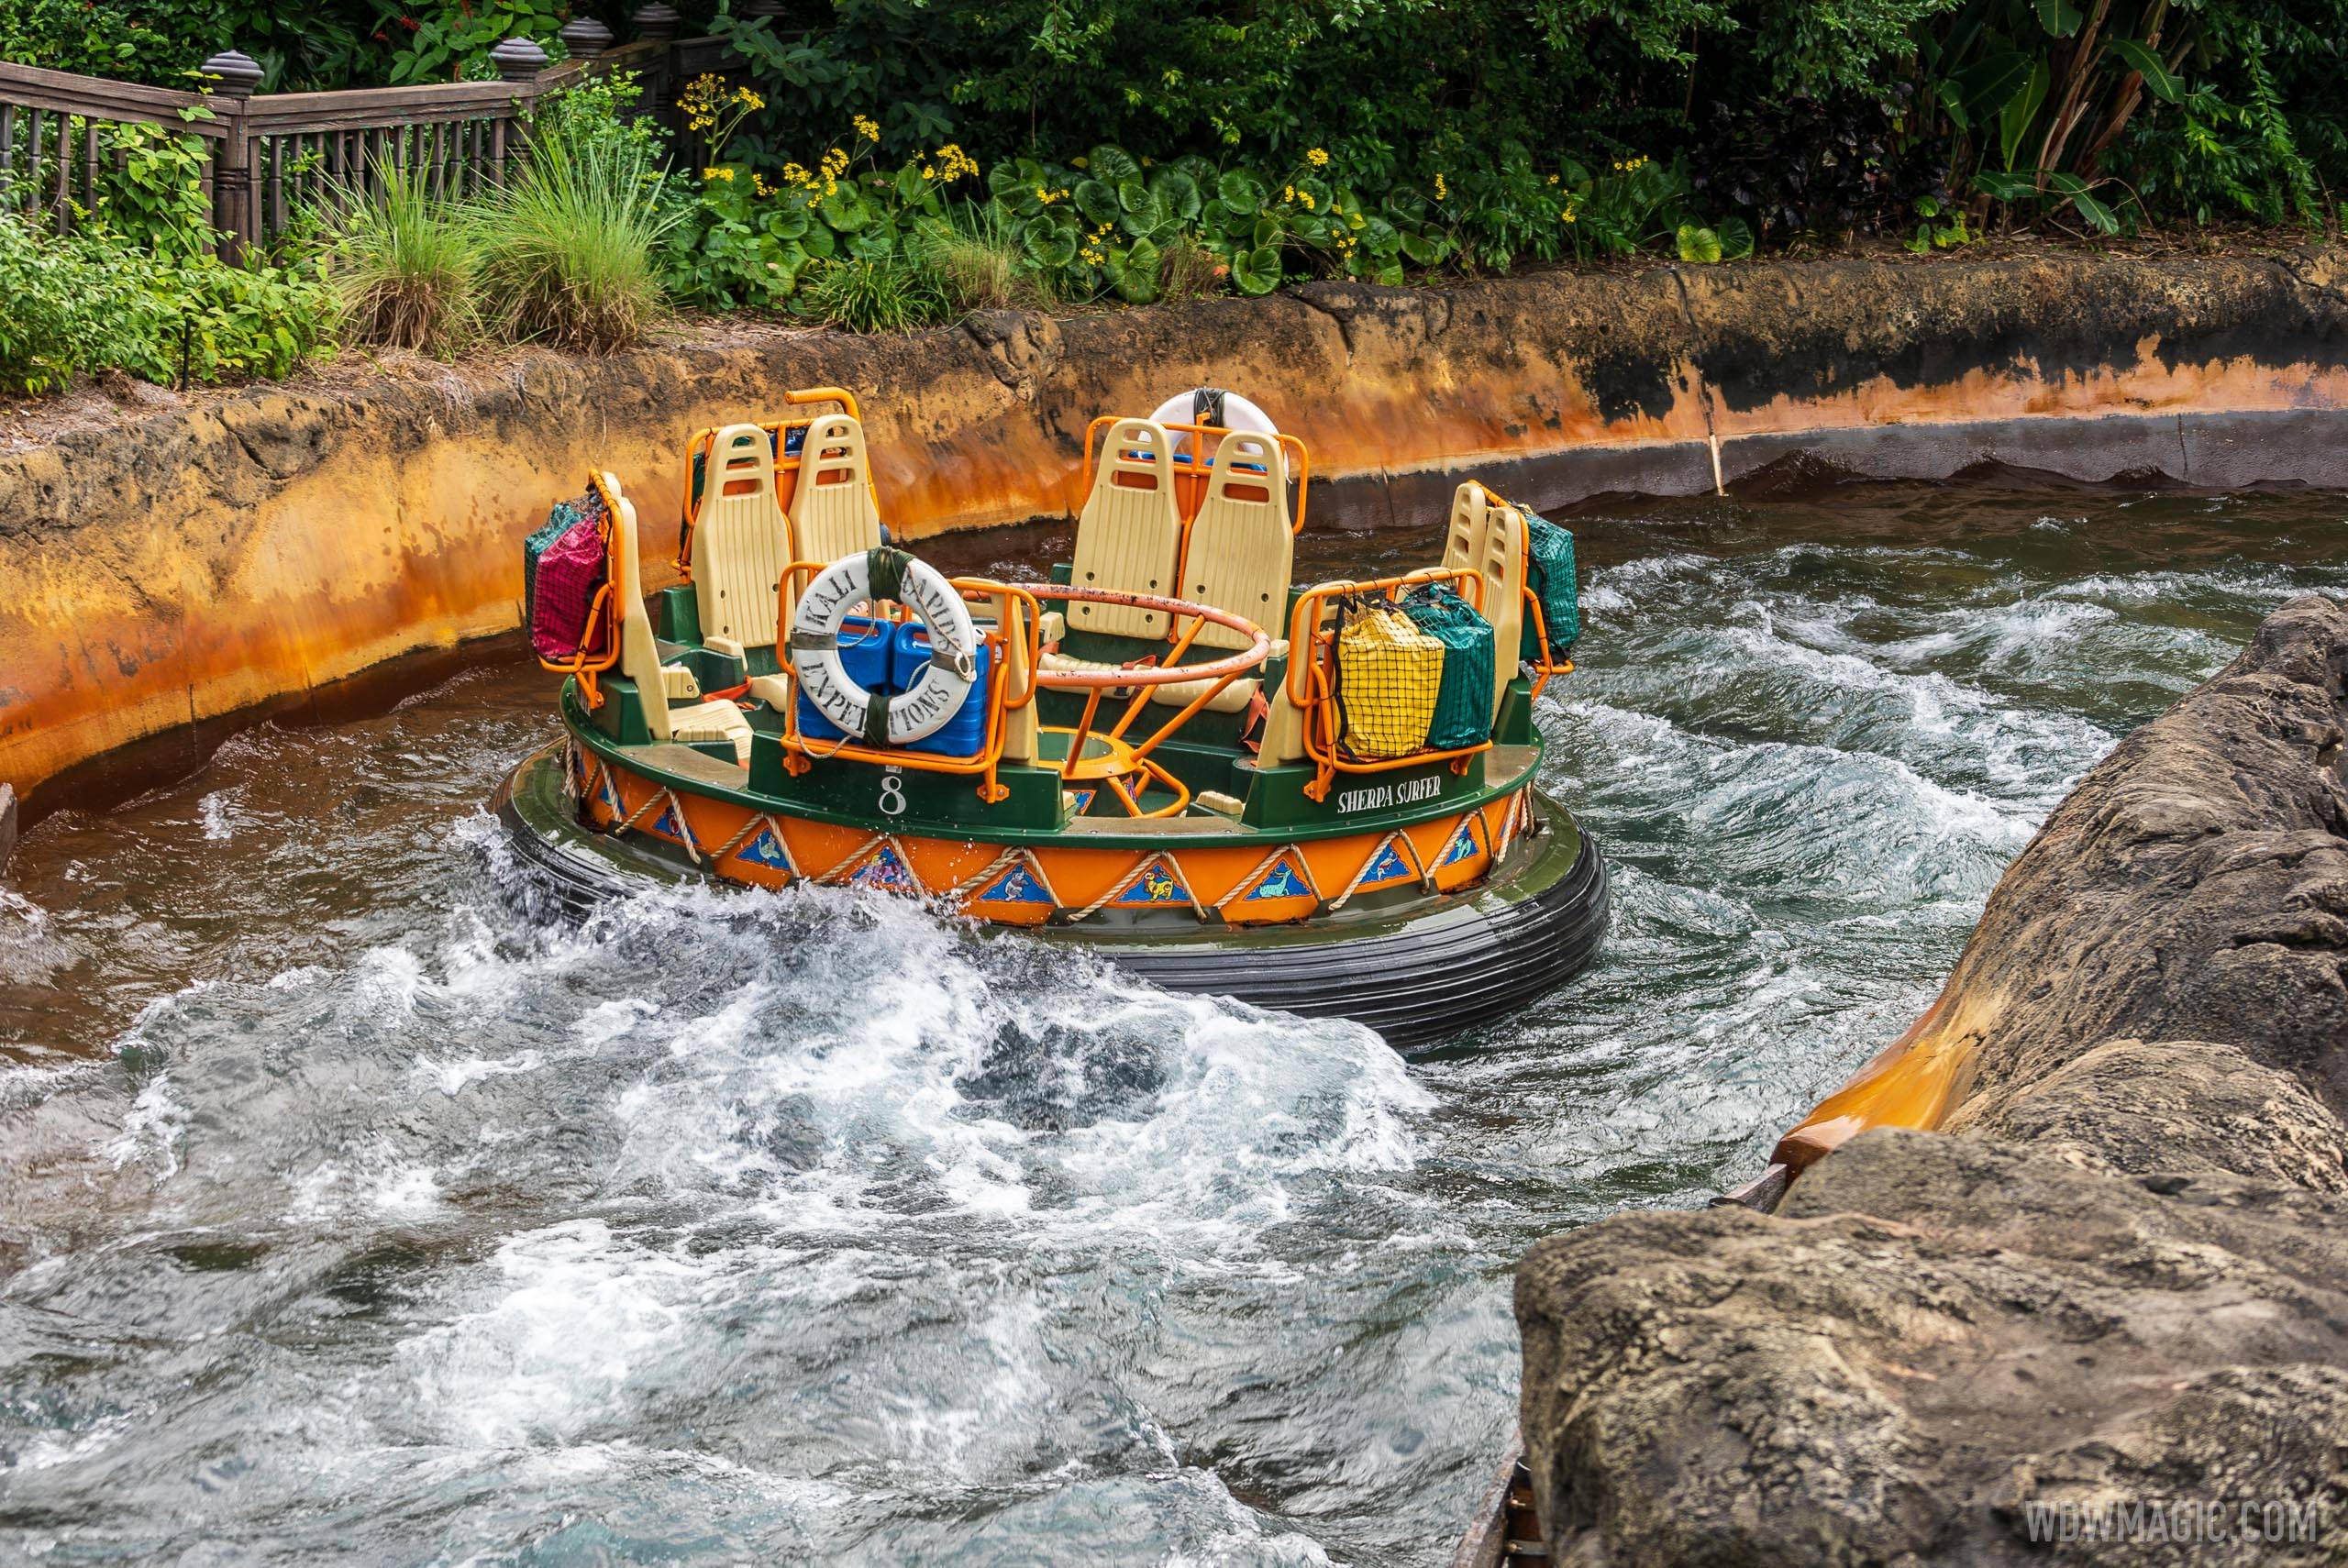 Kali River Rapids at Disney's Animal Kingdom reopens from its annual refurbishment